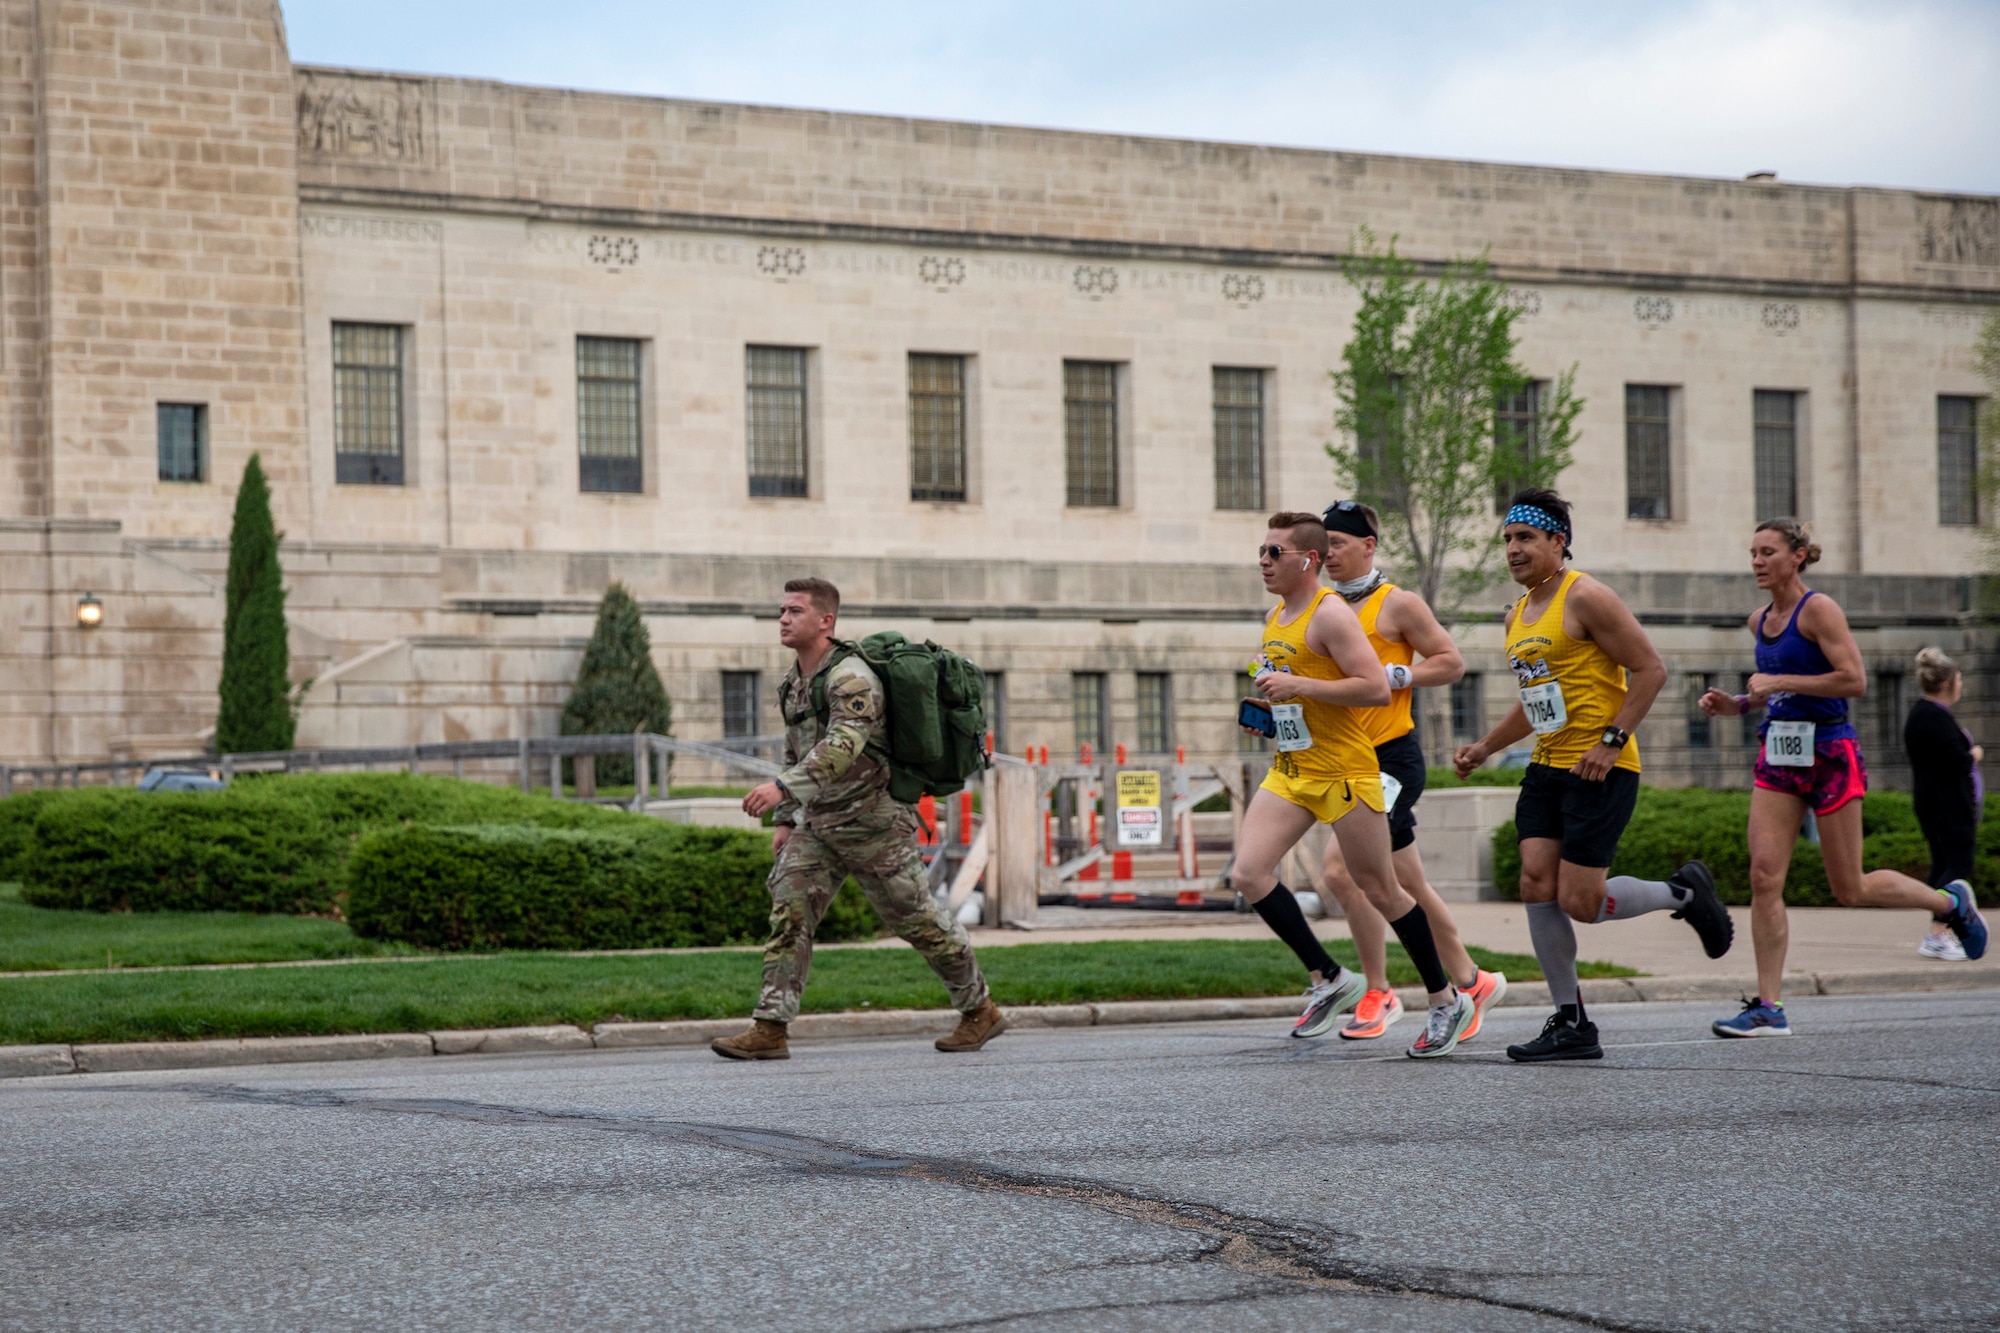 2021 Lincoln National Guard Marathon > 151st Air Refueling Wing